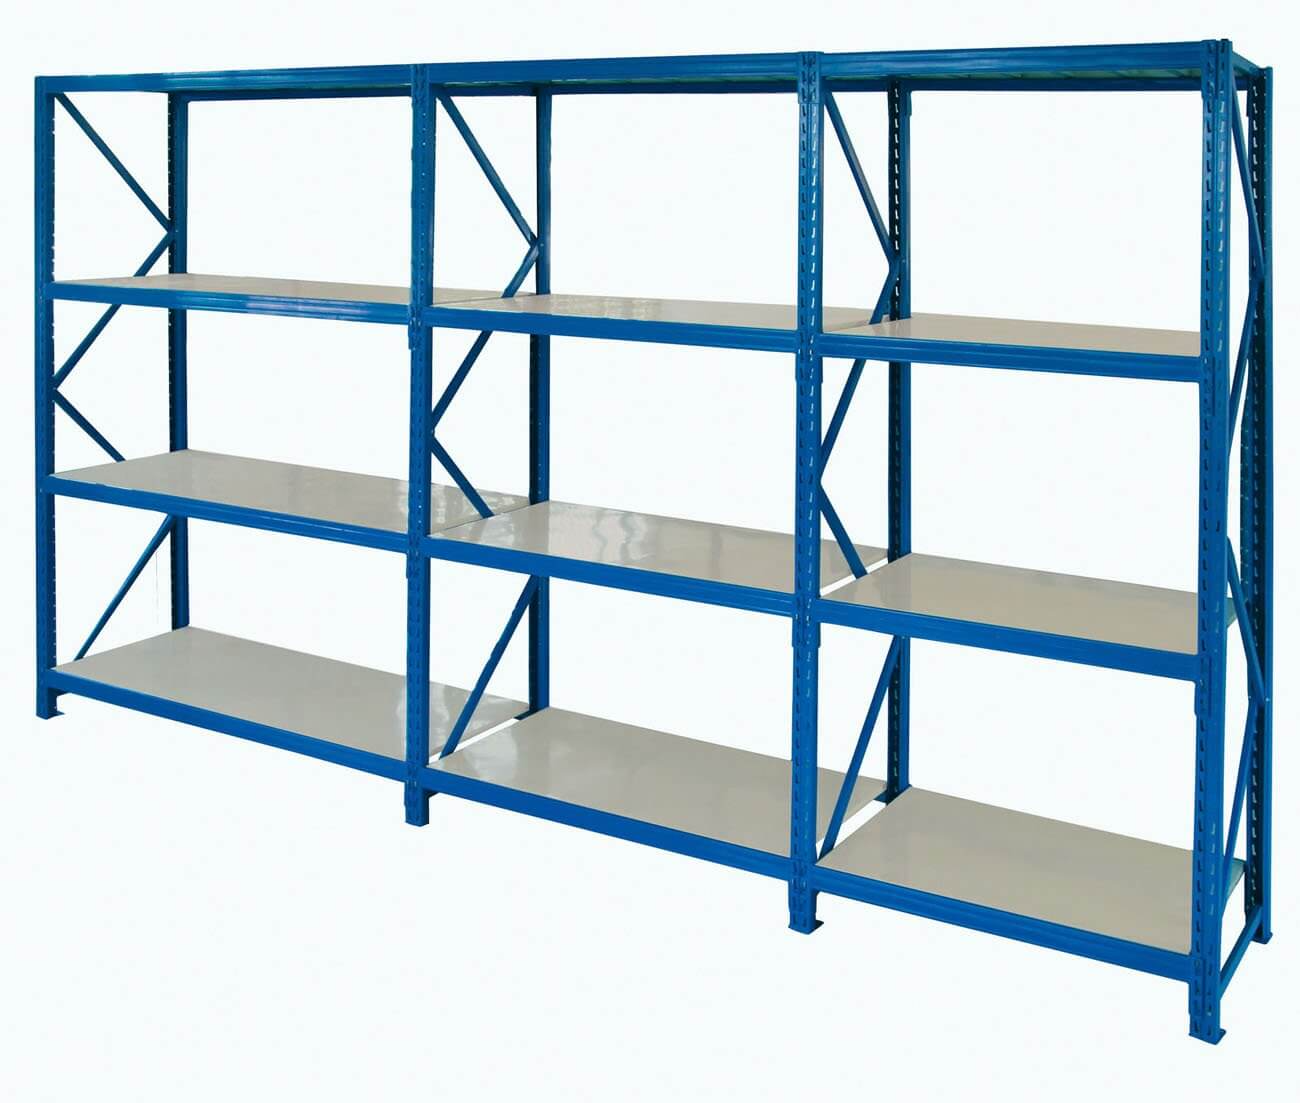 How To Choose A Warehouse Storage Rack?